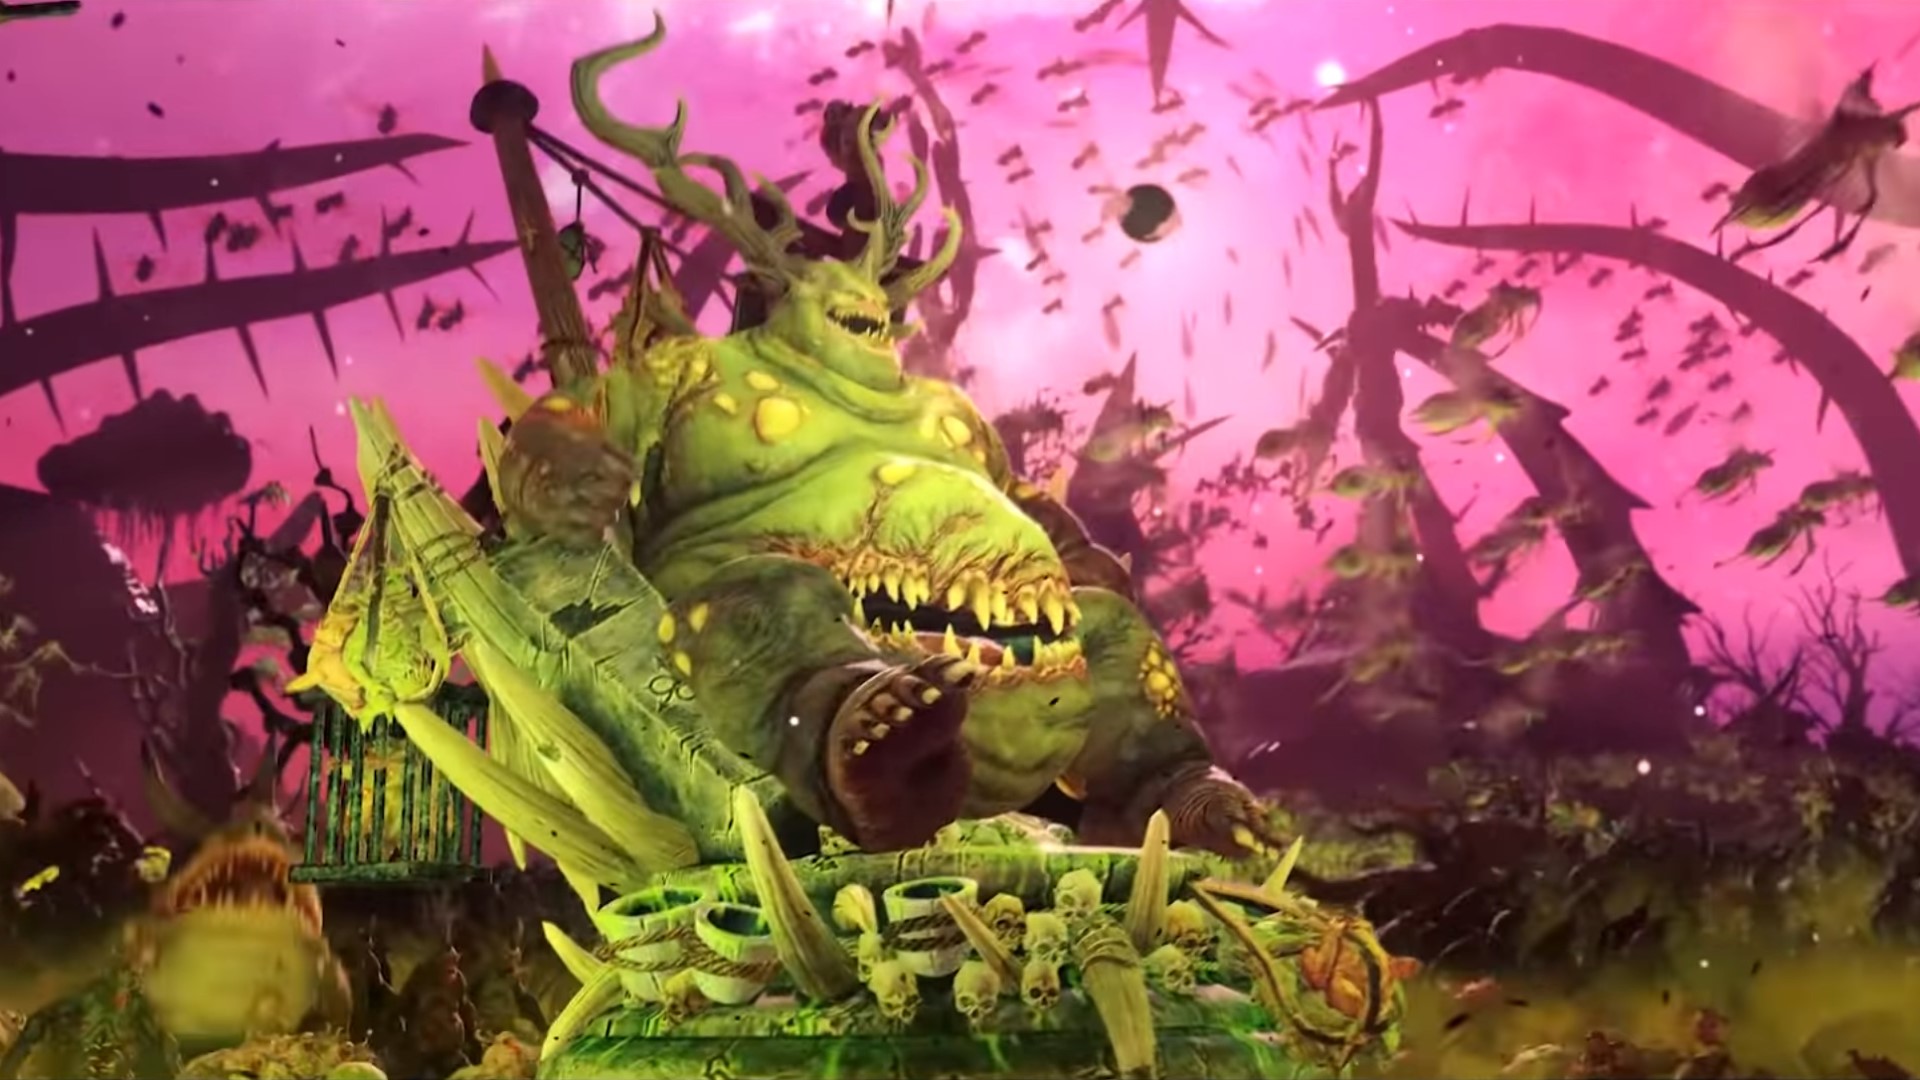 Yes, Total Warhammer 3’s Nurgle units are all extremely gross